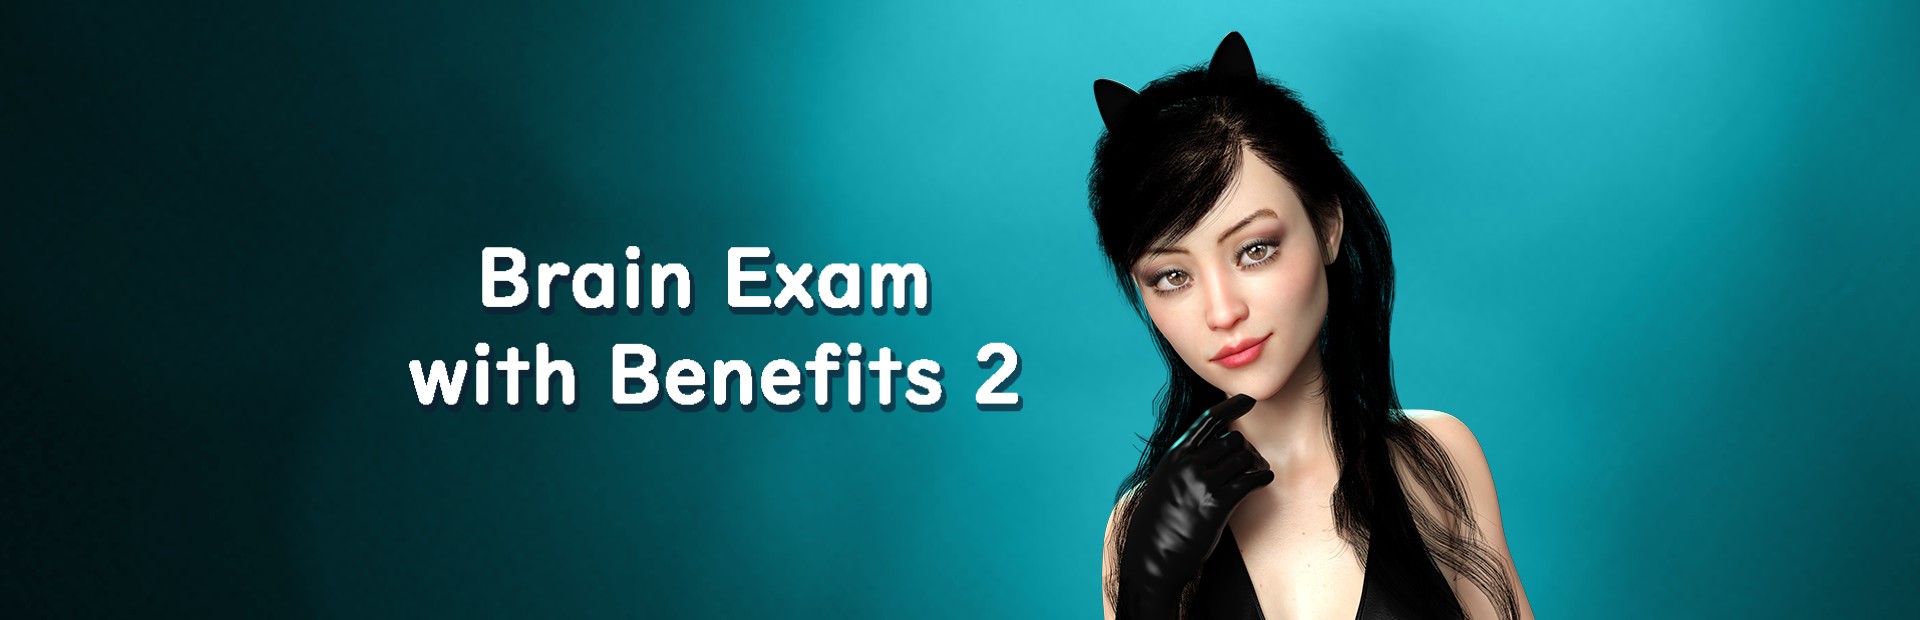 Brain Exam with Benefits 2 poster